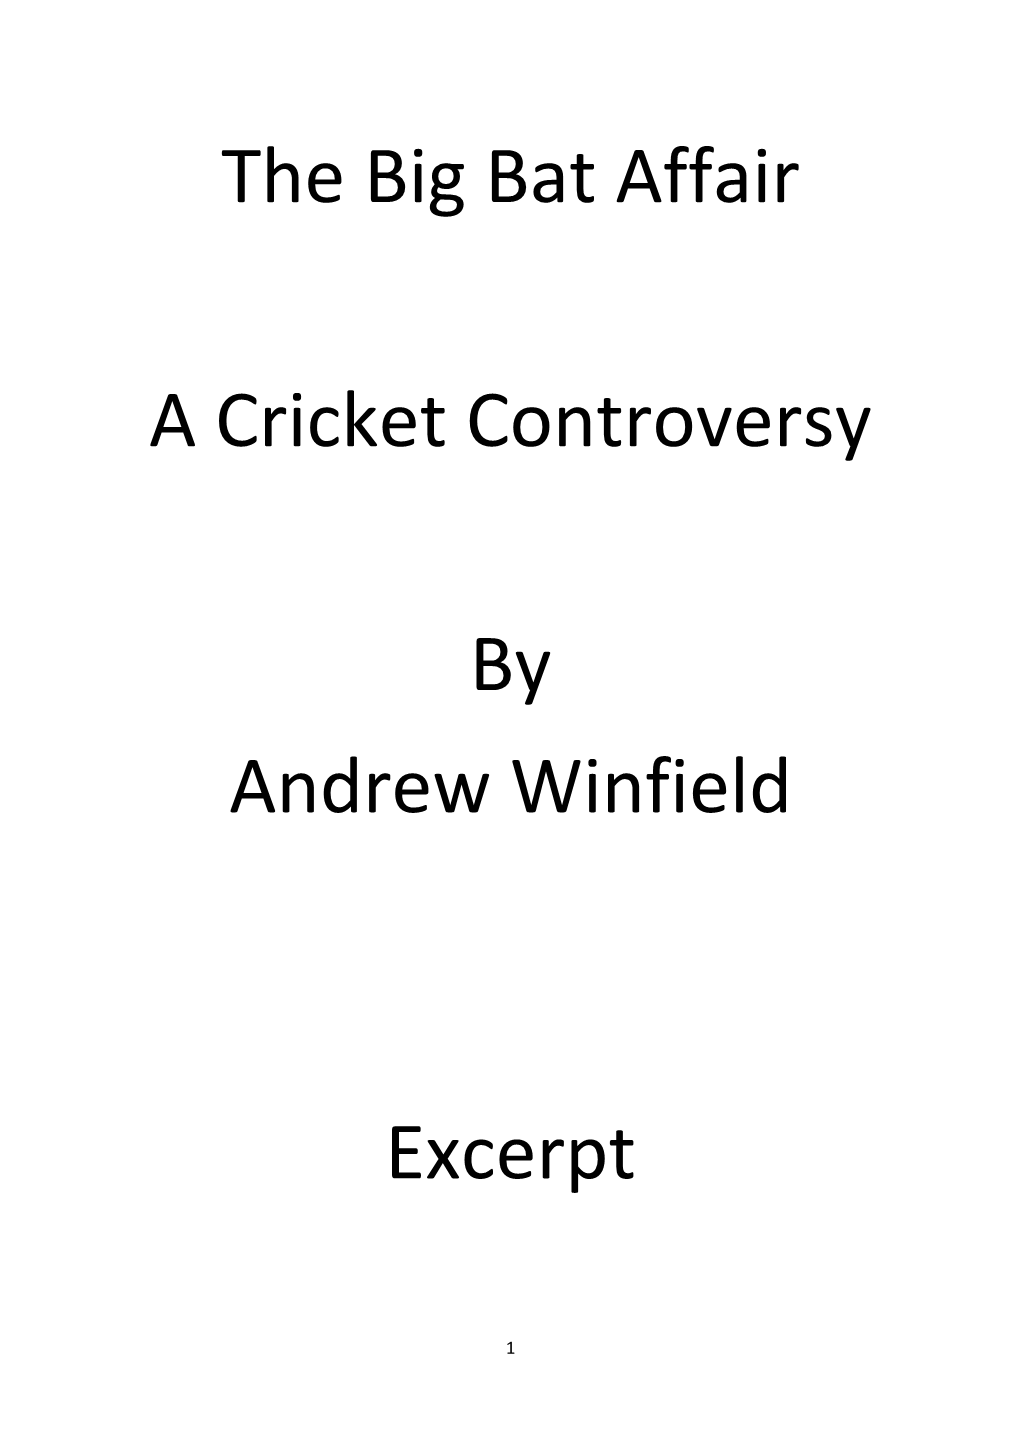 The Big Bat Affair a Cricket Controversy by Andrew Winfield